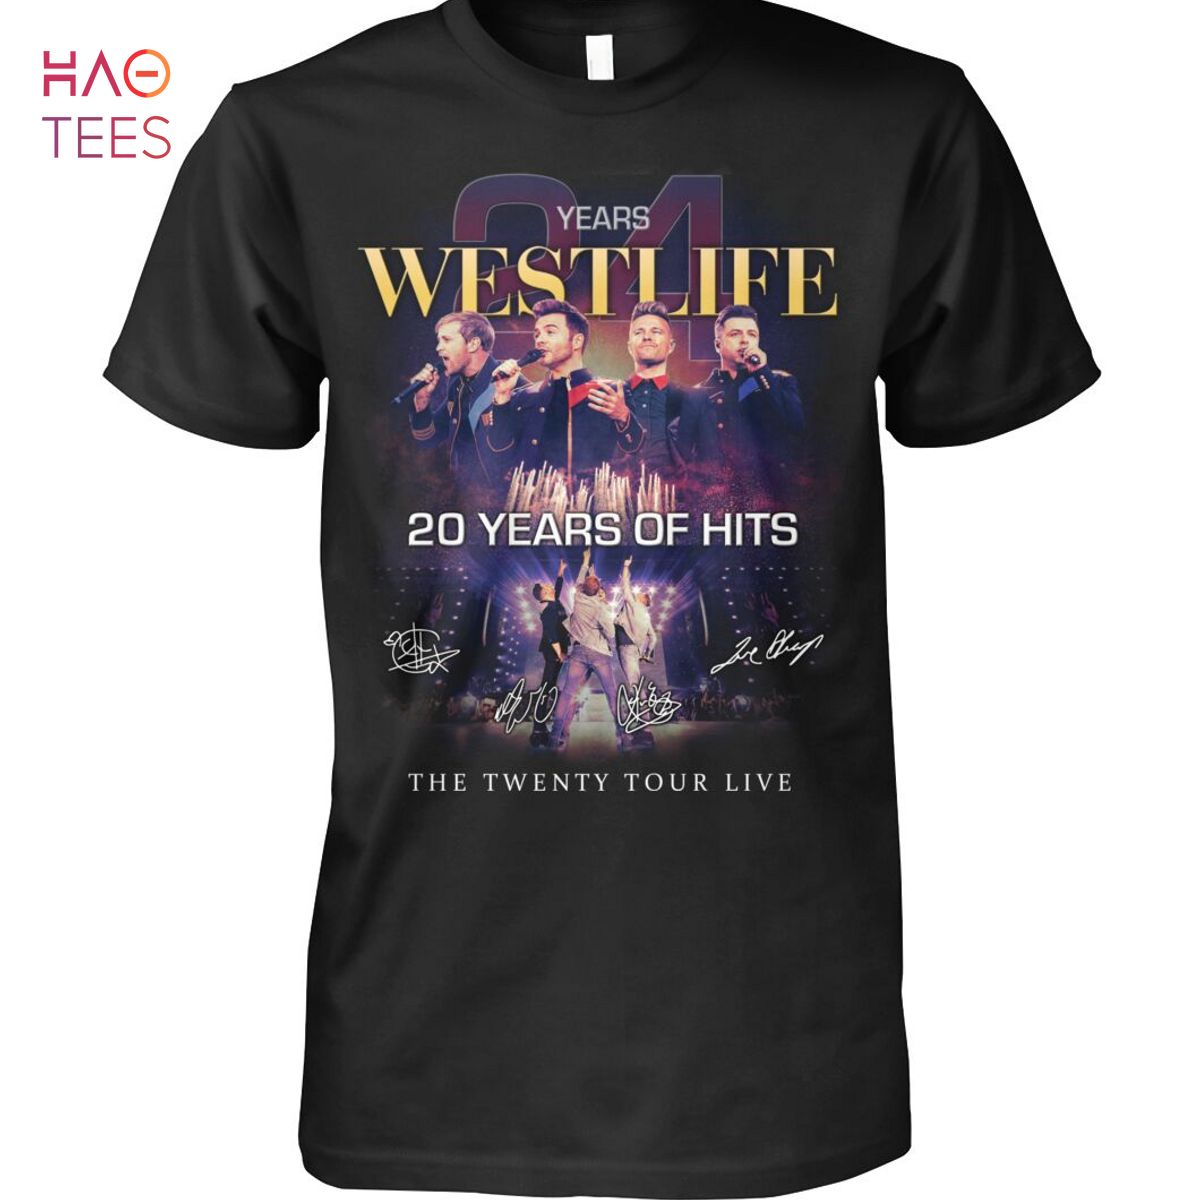 Westlife 20 Years Of Hits Shirt Limited Edition